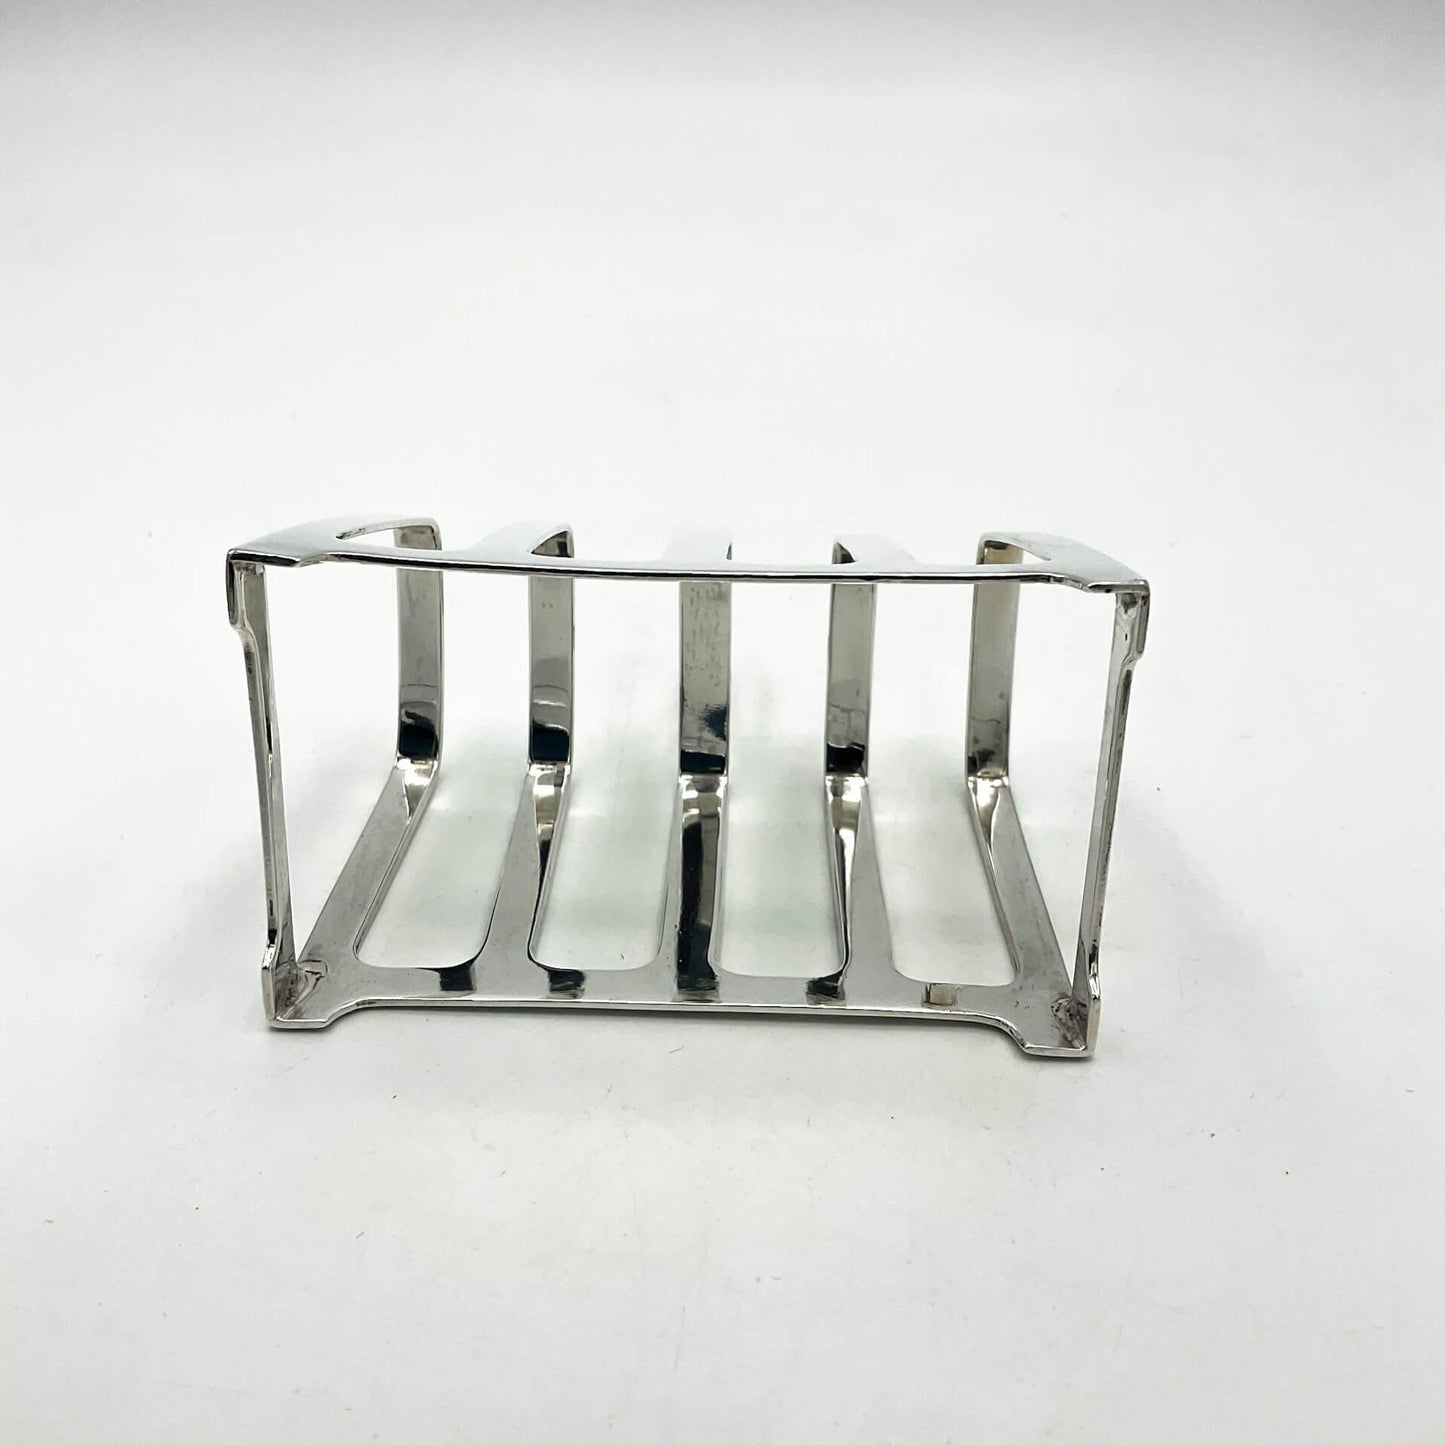 Base of Art deco style silver toast rack on a white background